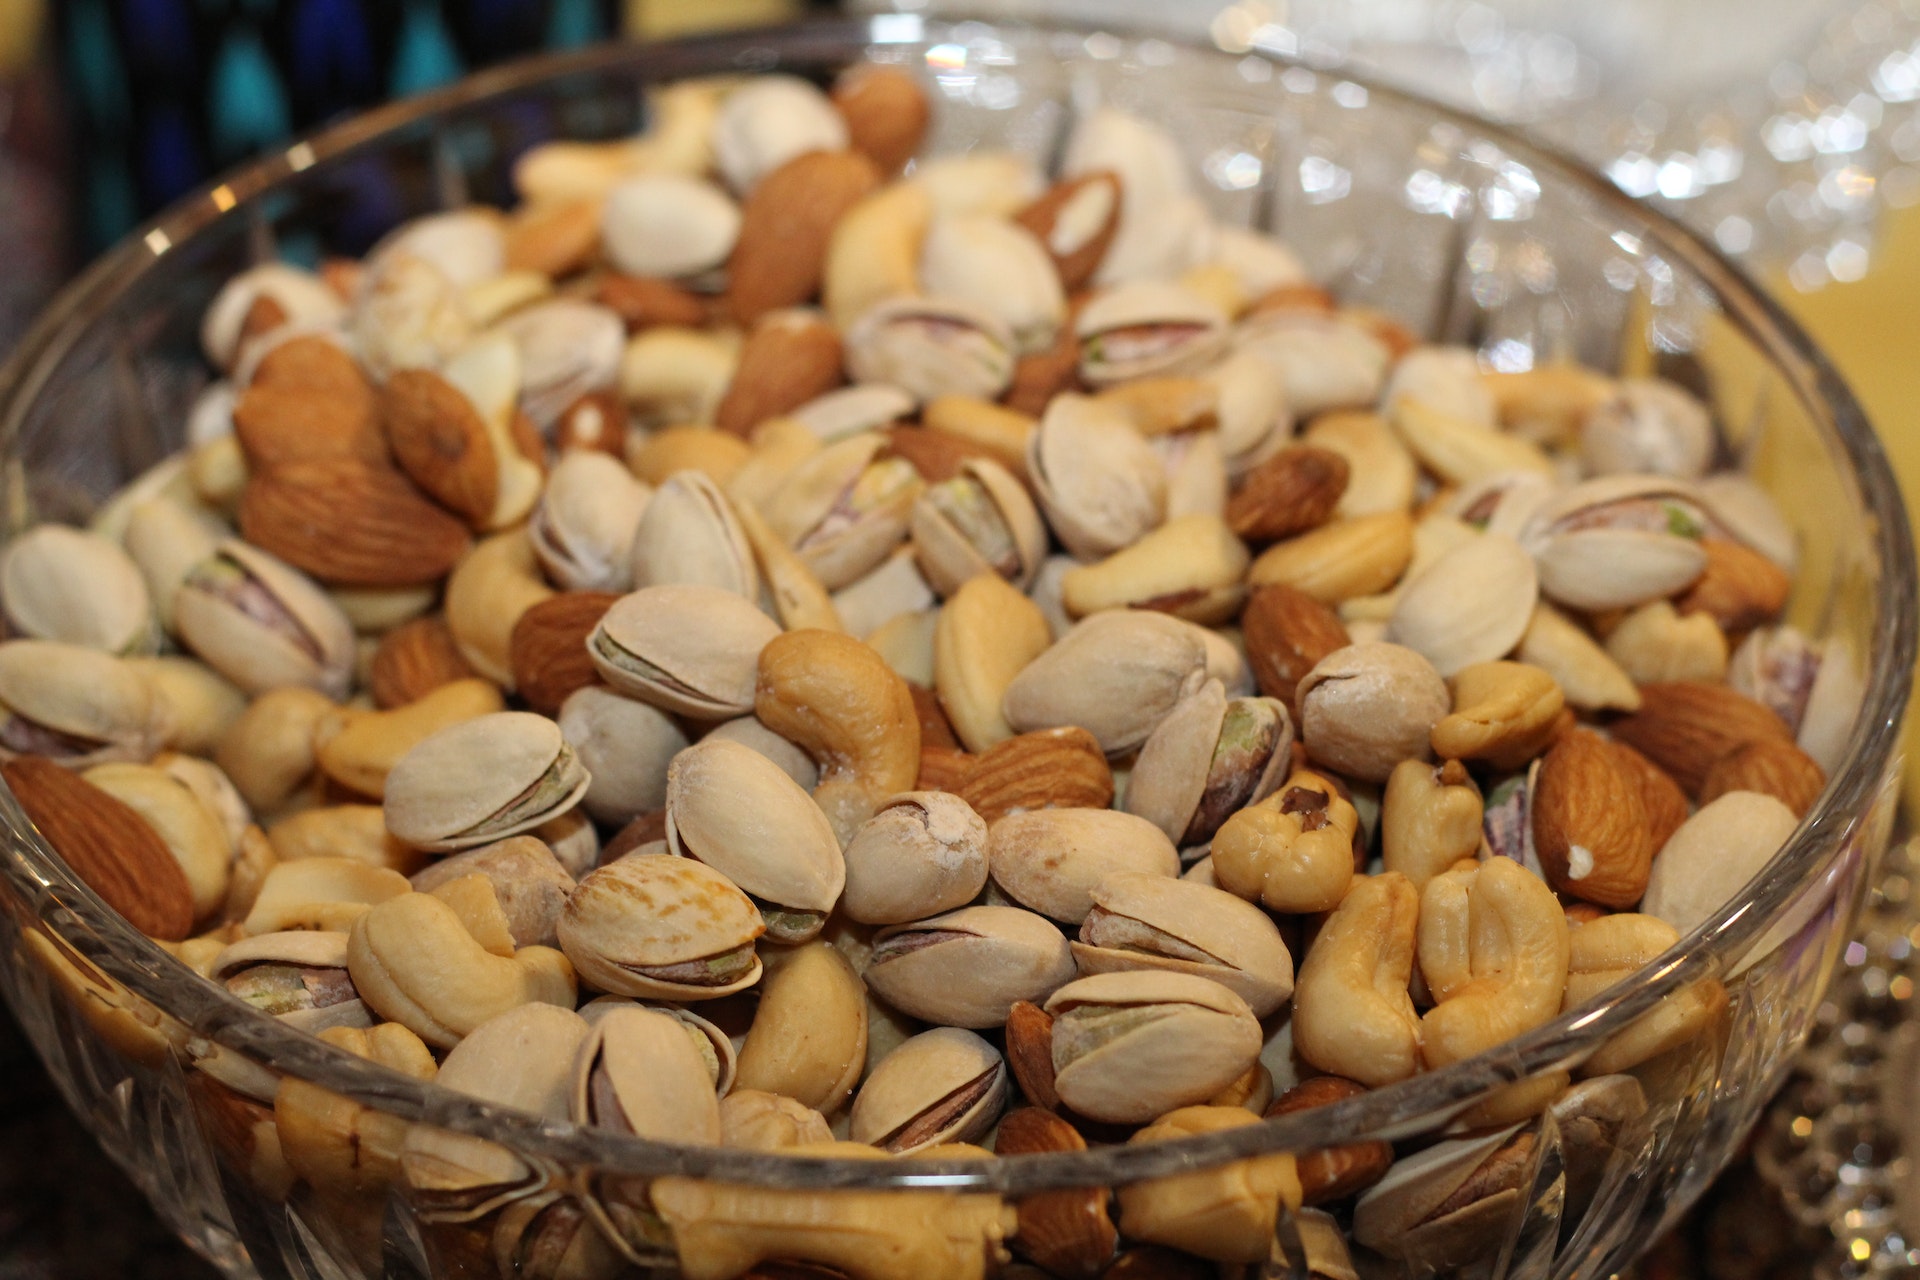 Roasted nuts are high protein vegan snacks